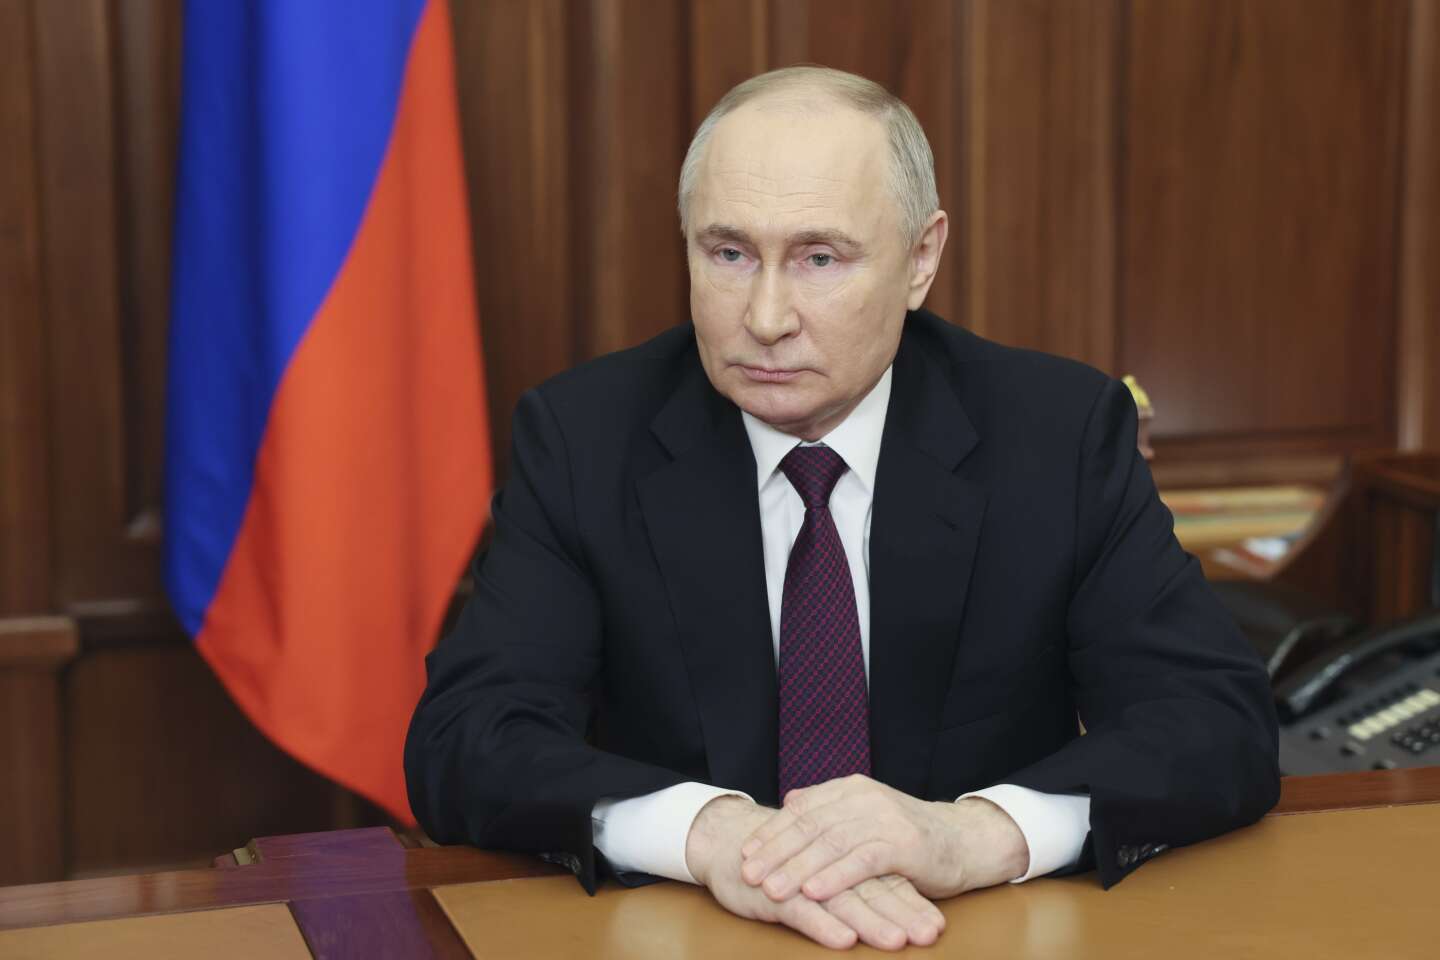 Russia legitimized Vladimir Putin's victory and denies any election fraud